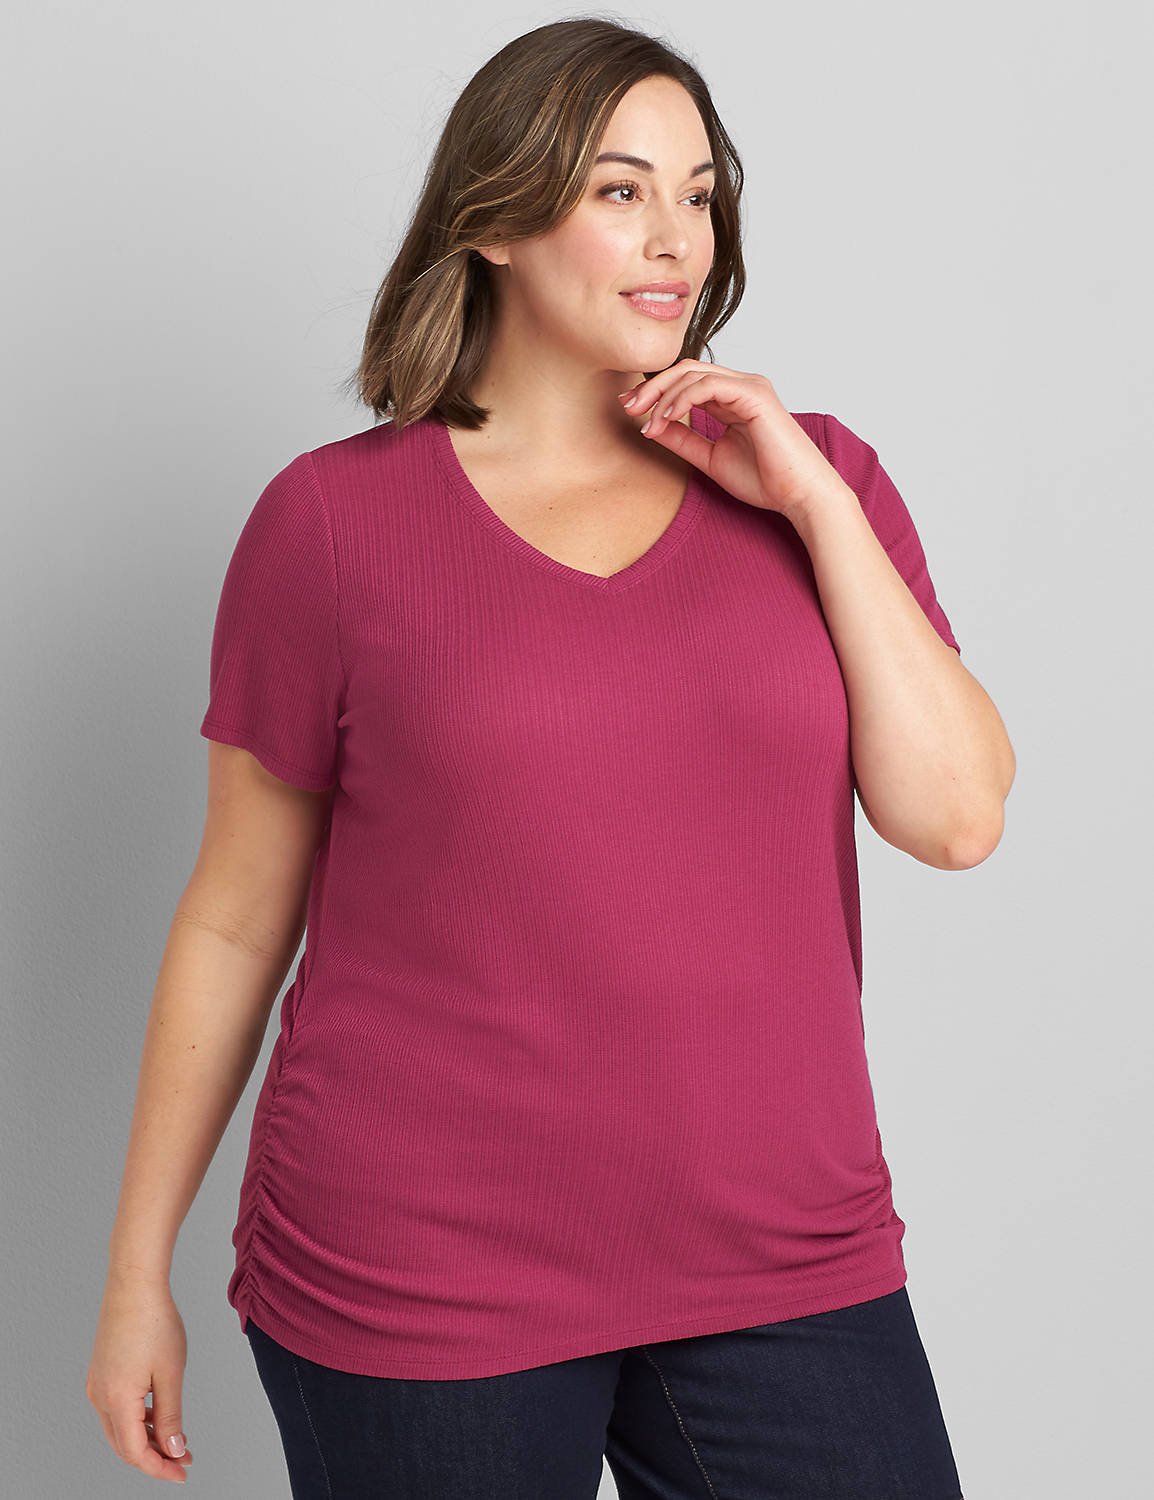 Pointelle Ruched Side Tee Product Image 1